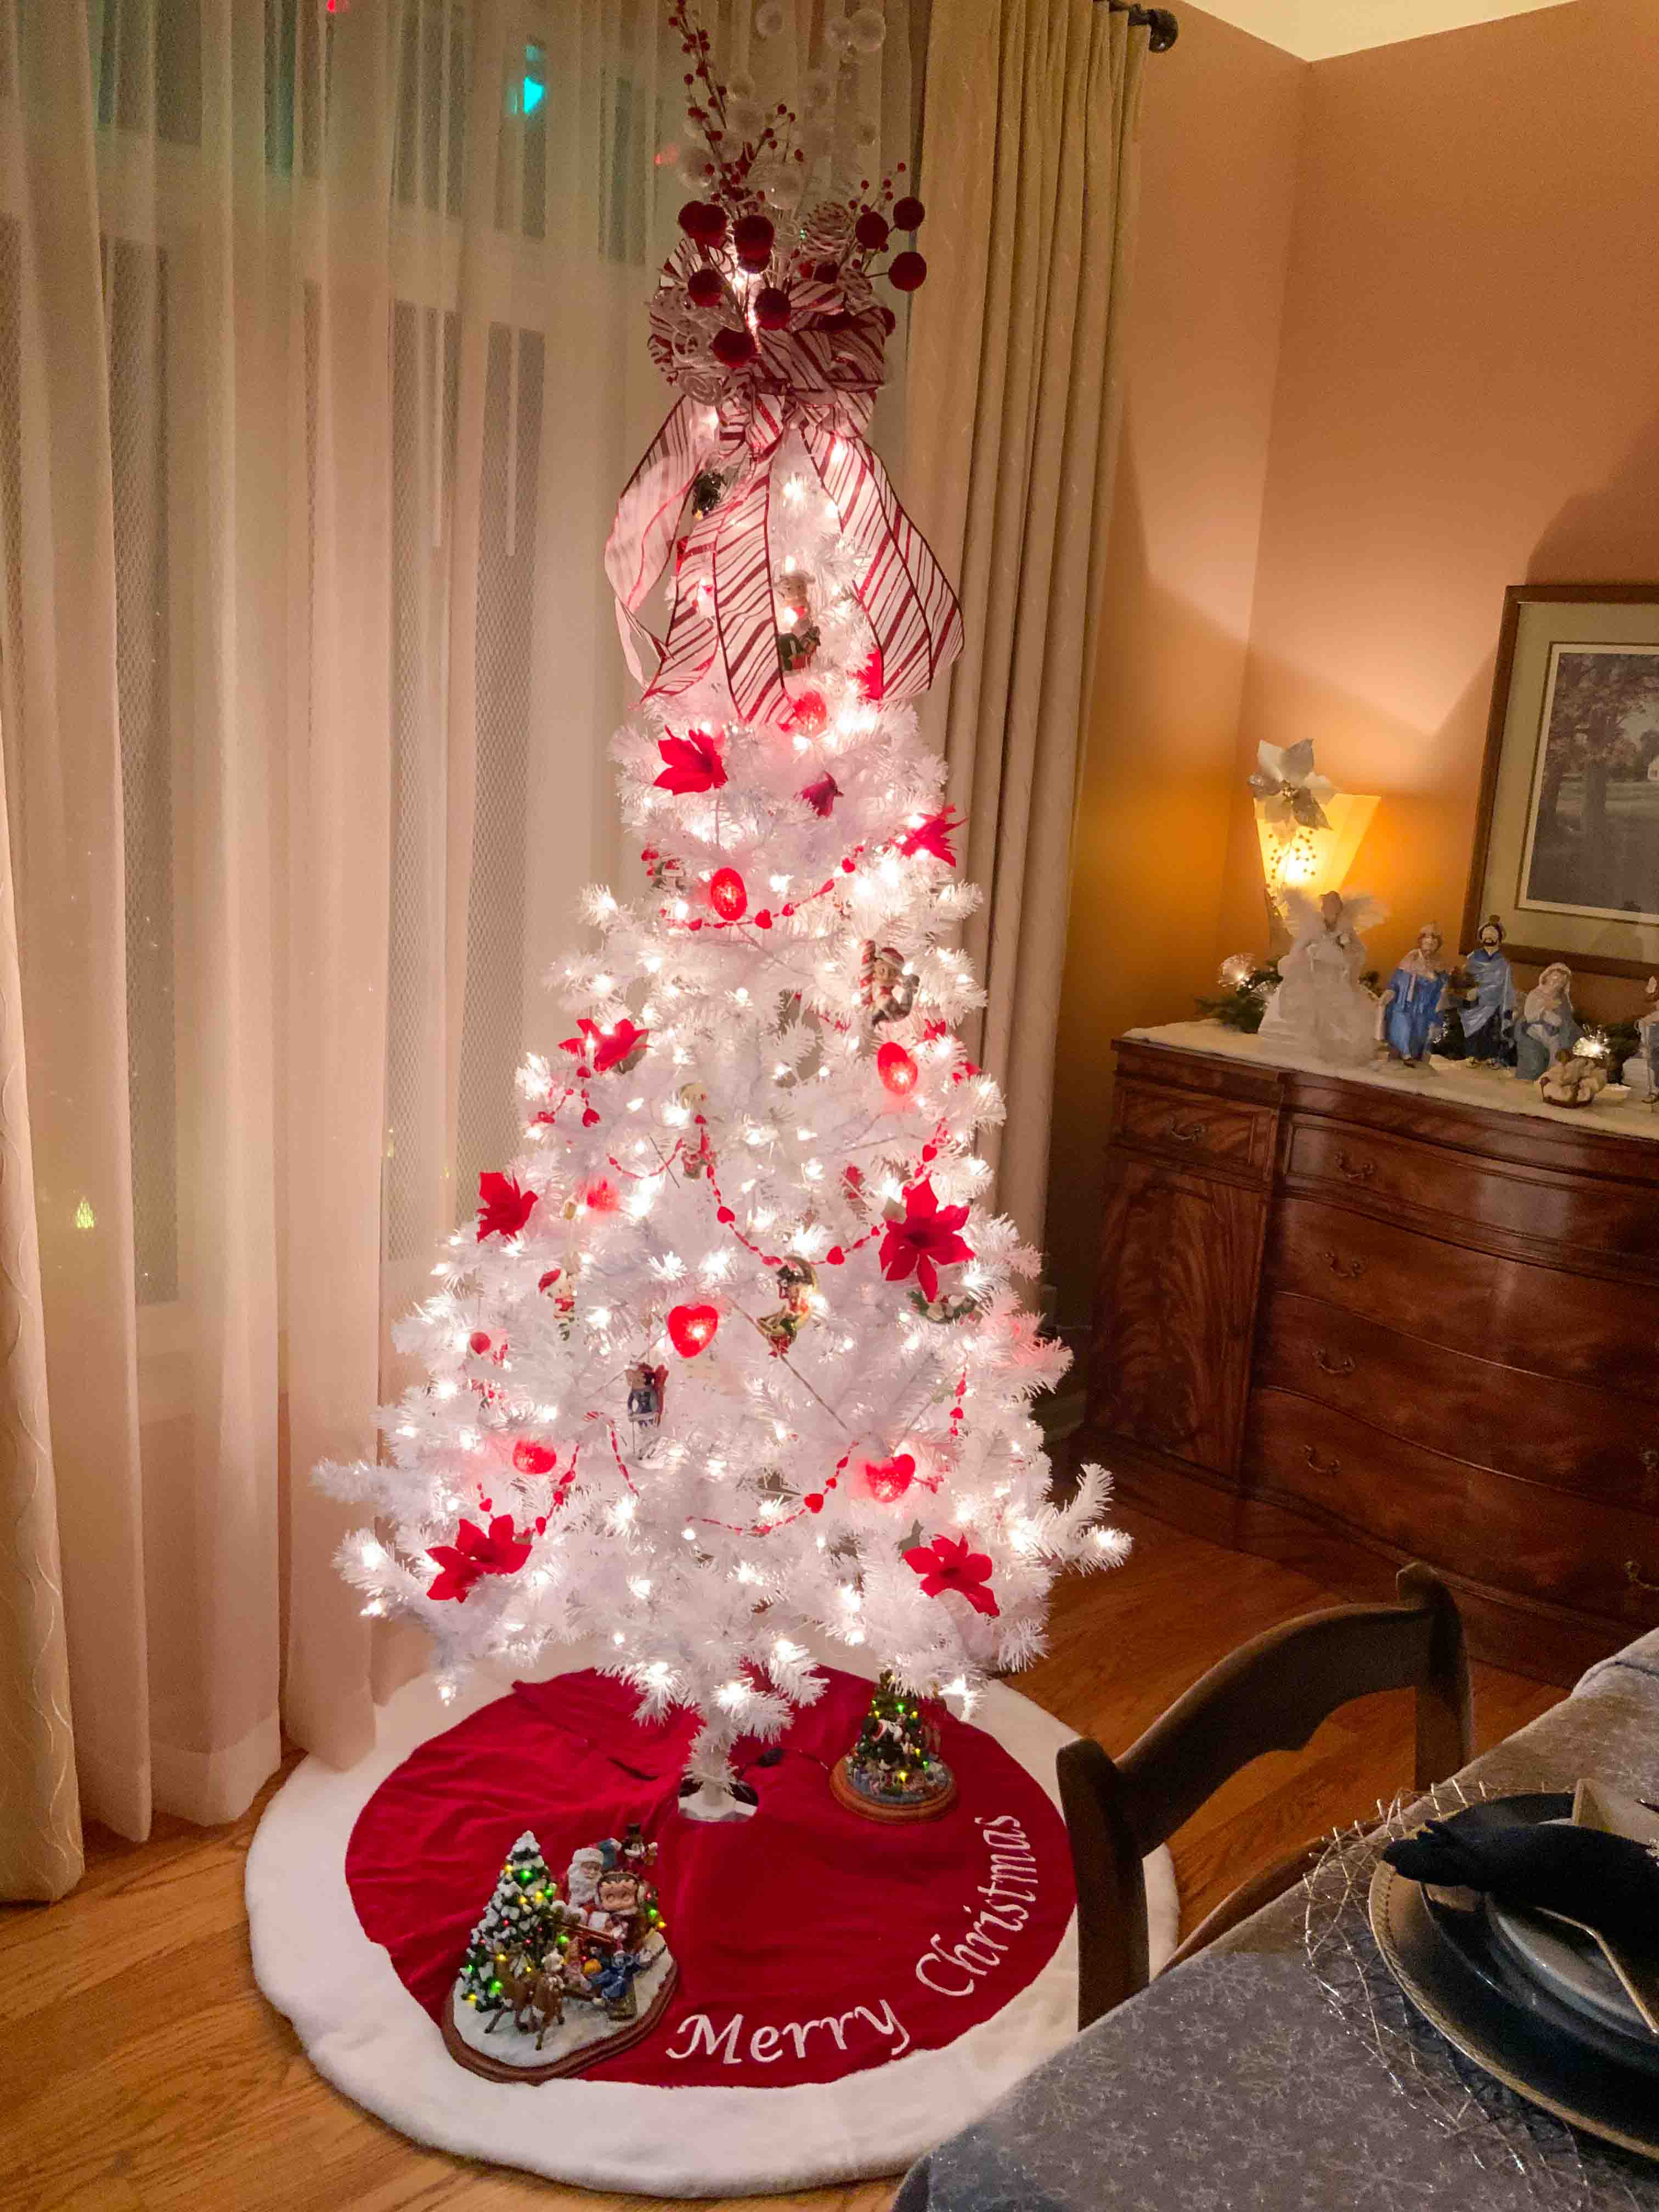 Betty Boop Tree in the dining room.  Location:  11207 Wilmar Dr, Liberty MO 64068                                 Source: Julane Crabtree                                Date:  4 Dec 2022